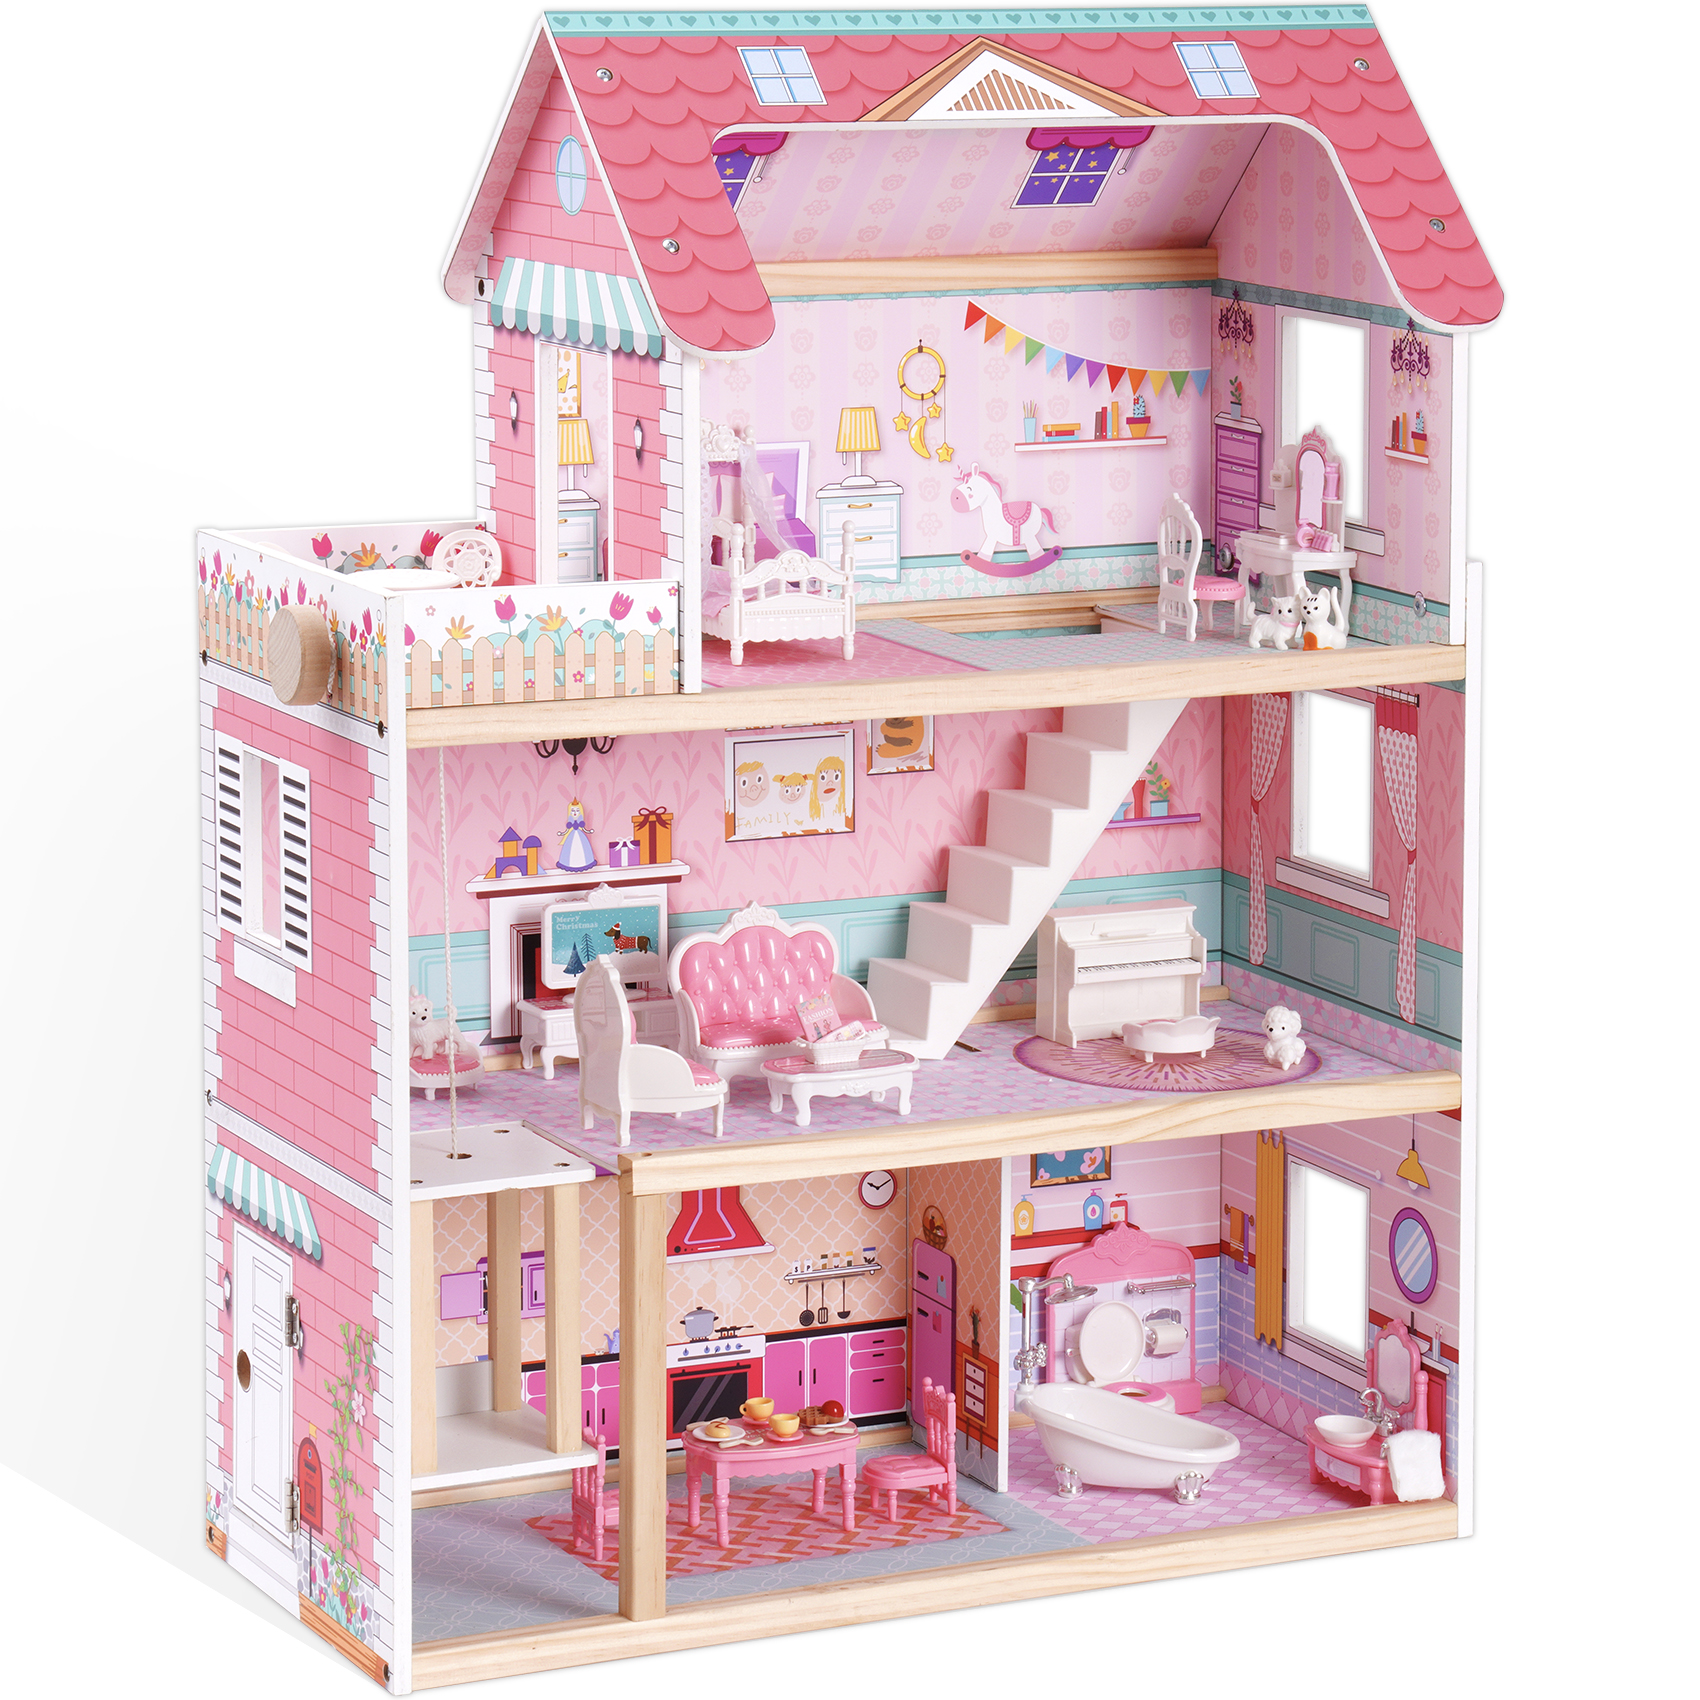 Wooden Dollhouse for Kids with 24 pcs Furniture Preschool Dollhouse House Toy for Kids，S-Boyel Living